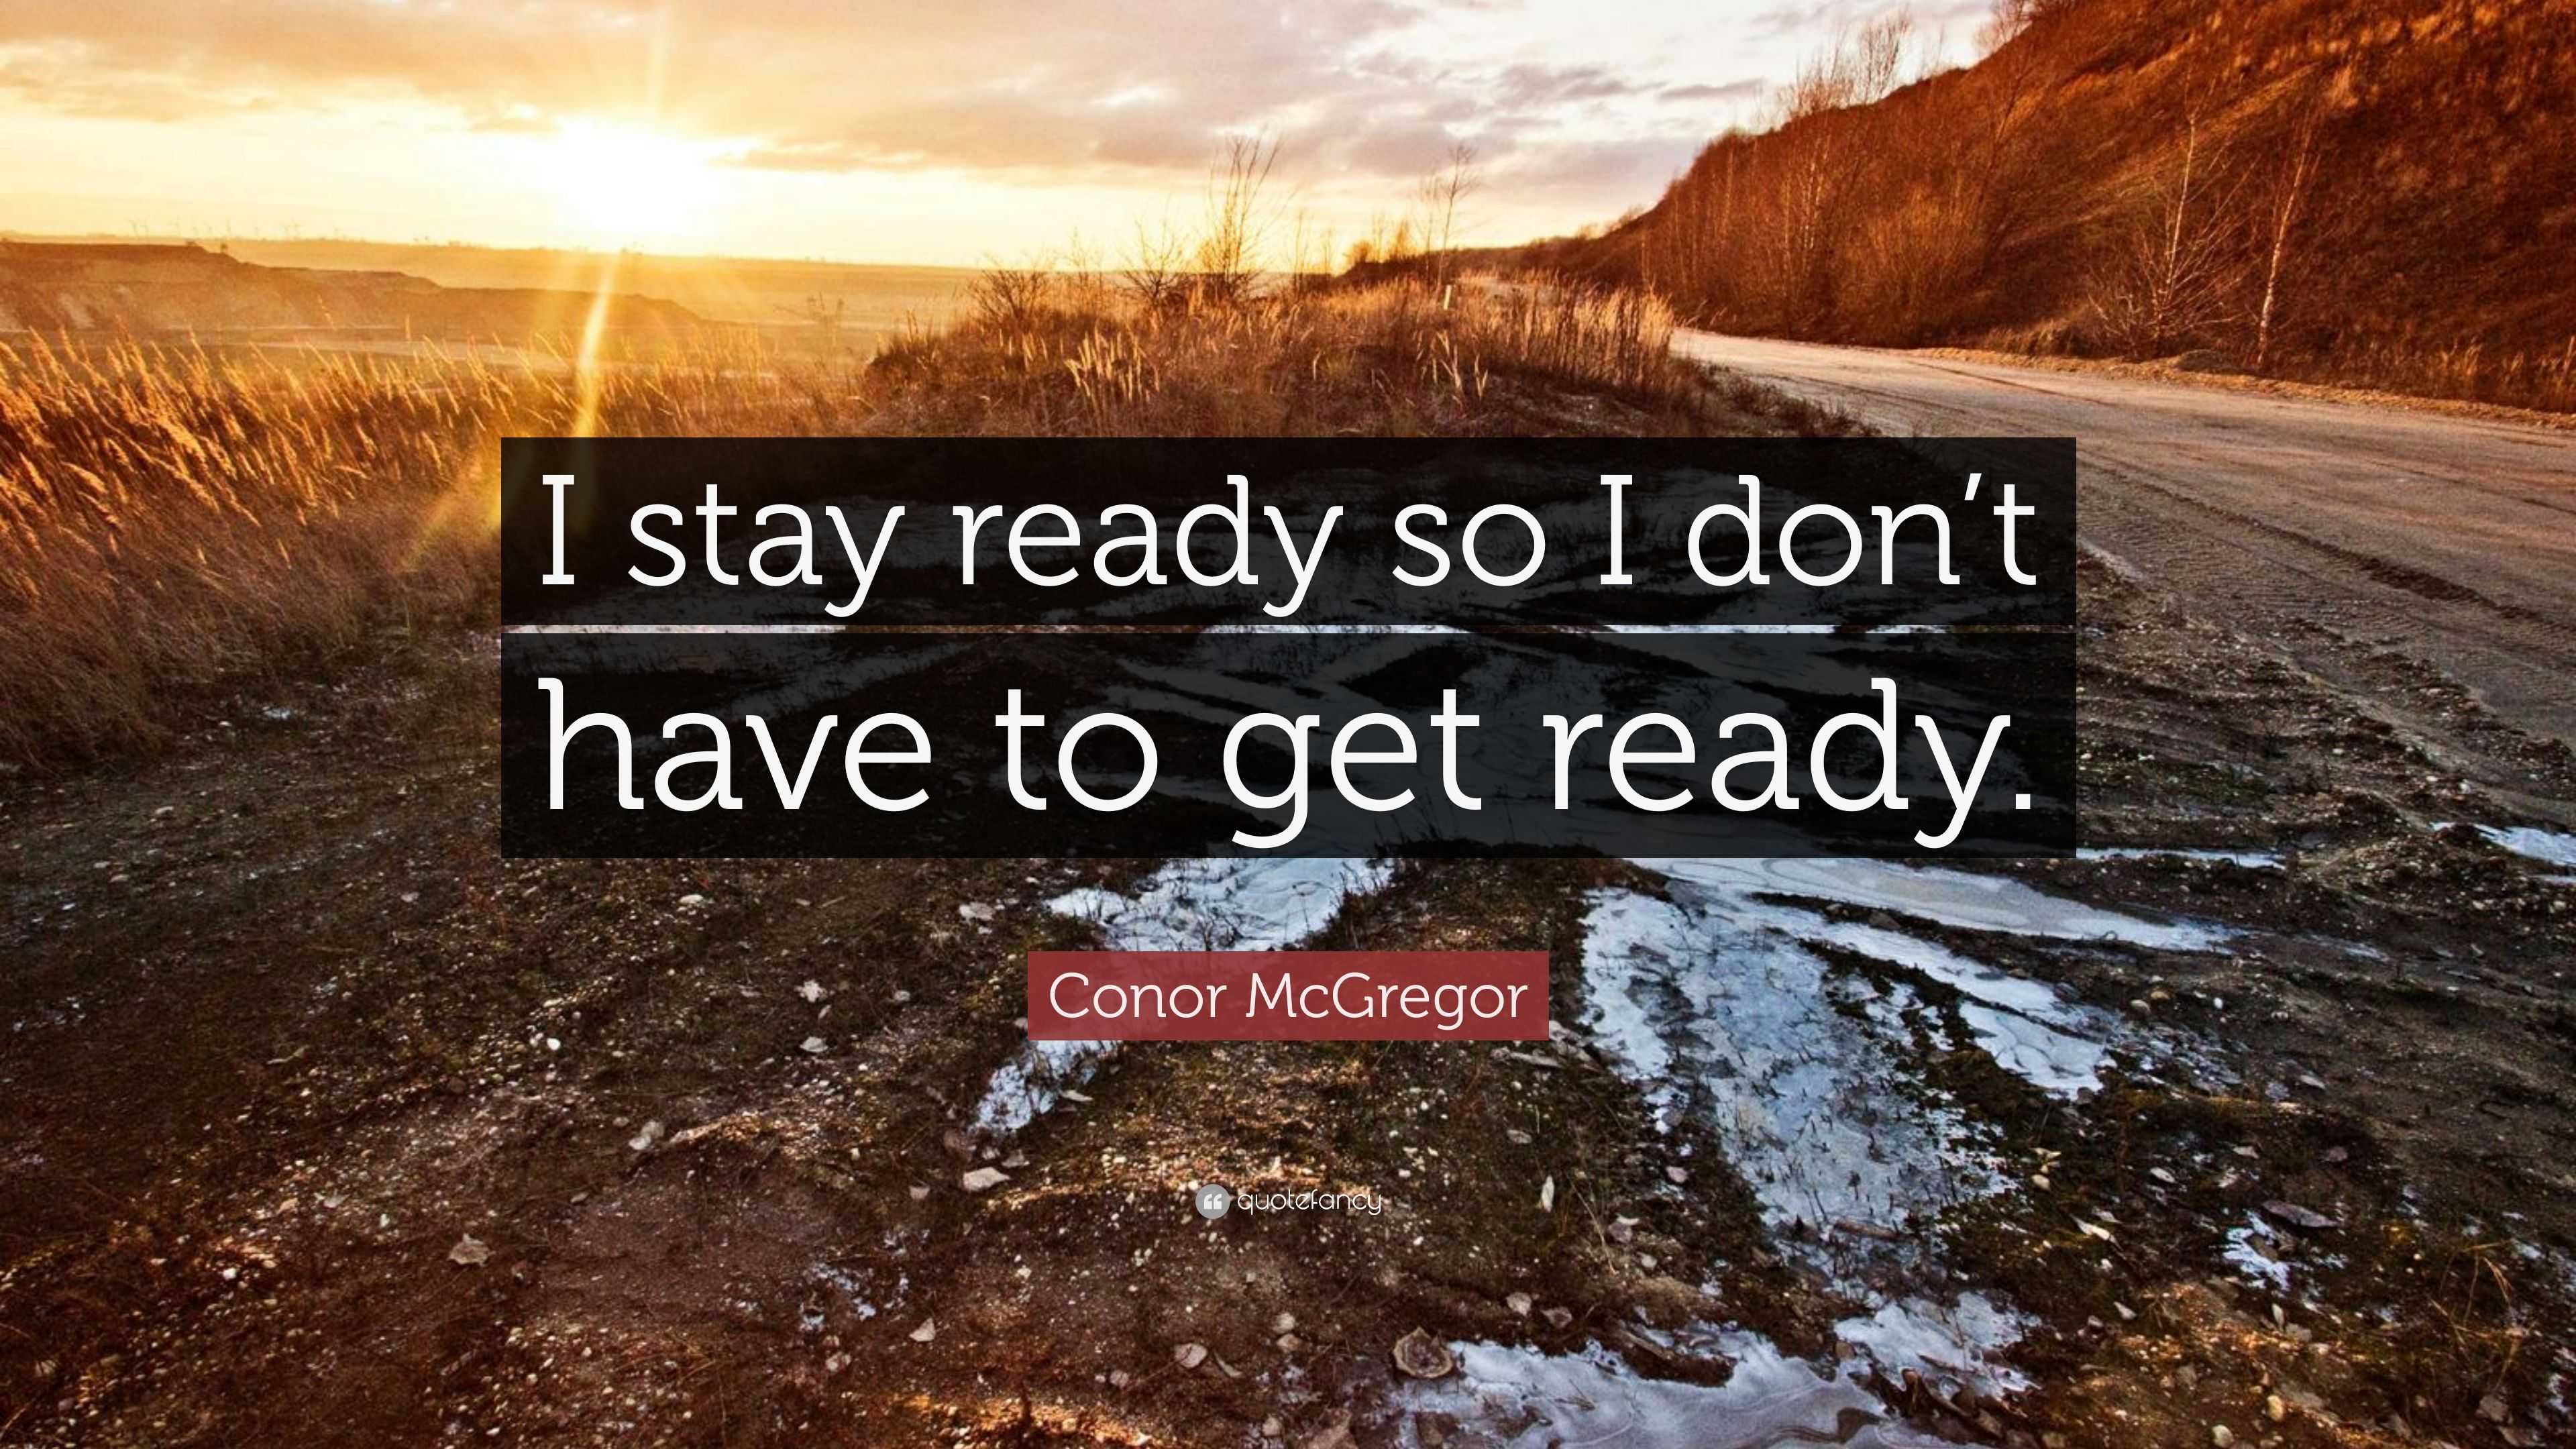 2010630 Conor McGregor Quote I stay ready so I don t have to get ready